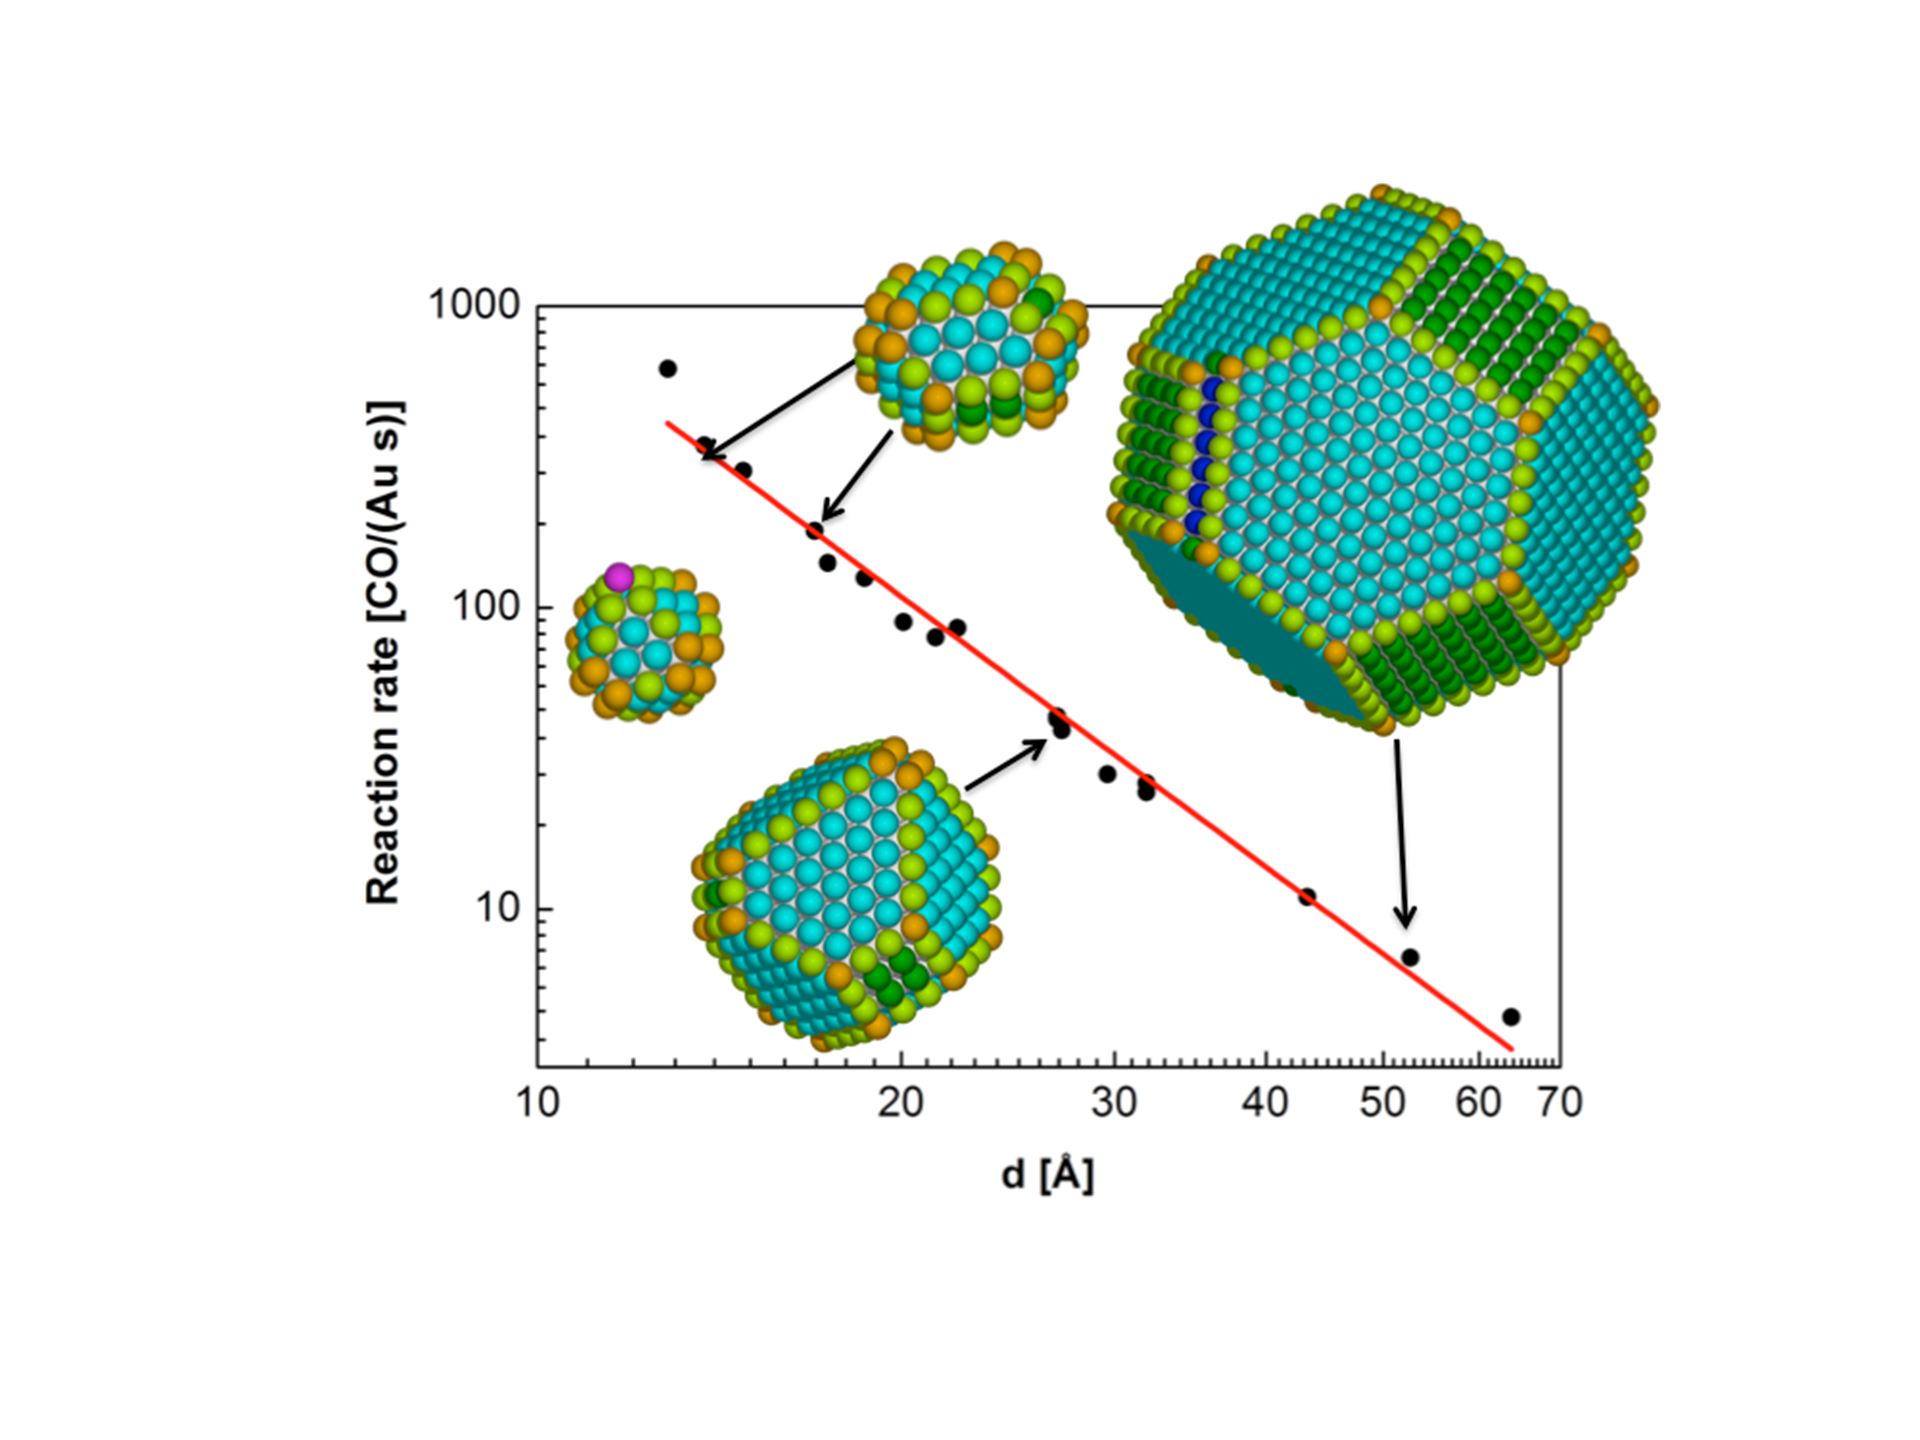 Shape and functionality of nanoparticles